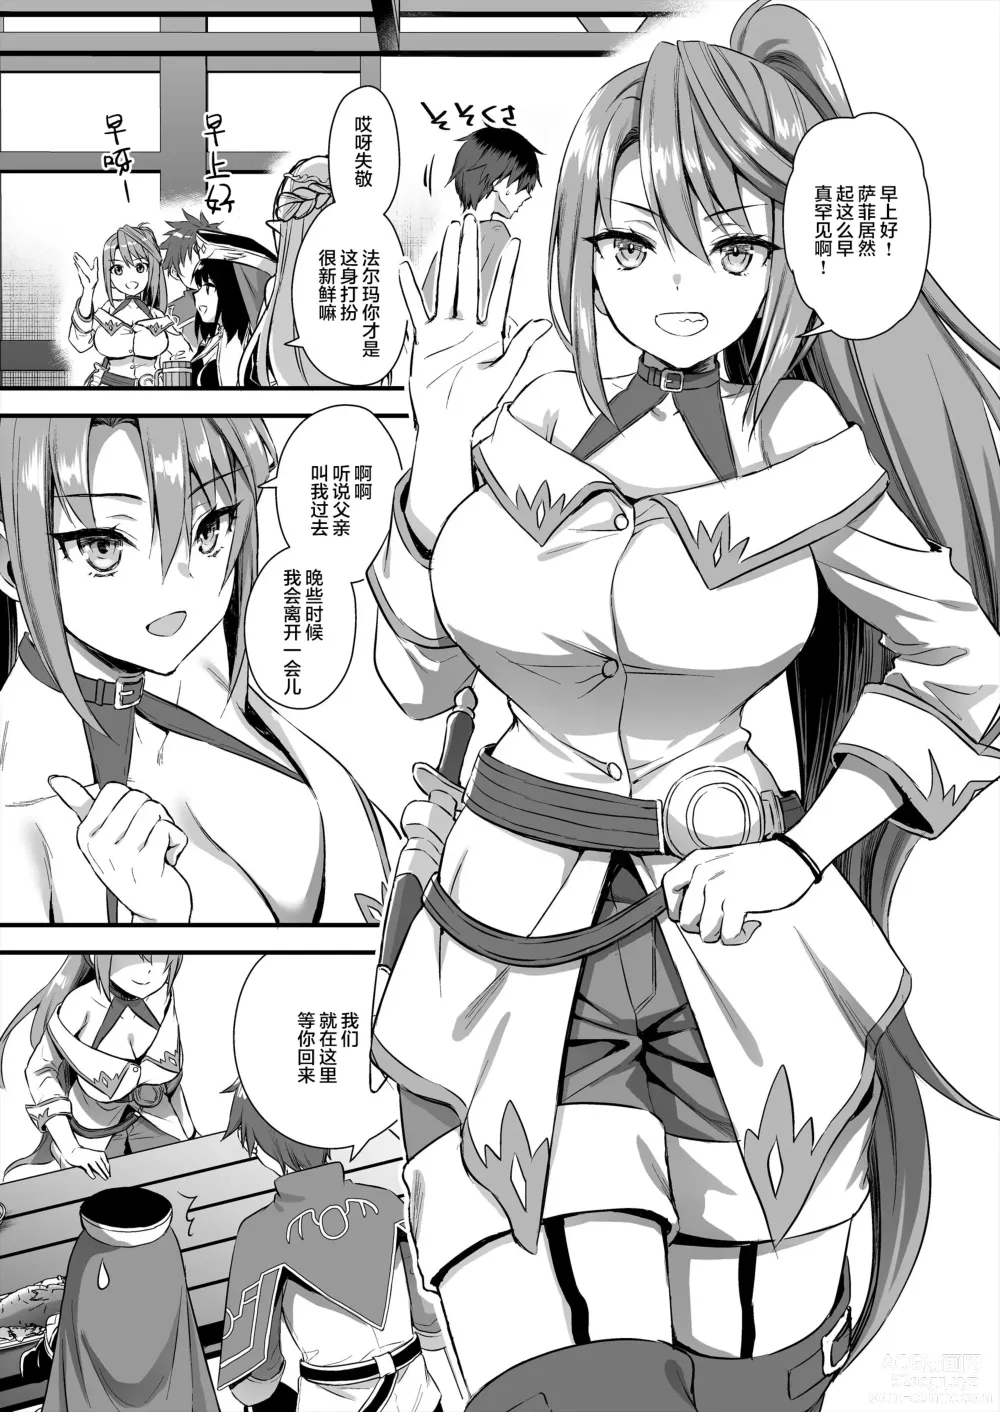 Page 6 of doujinshi Other World Elf Estruss Magic Eye 5 ~Time Stop Edition~